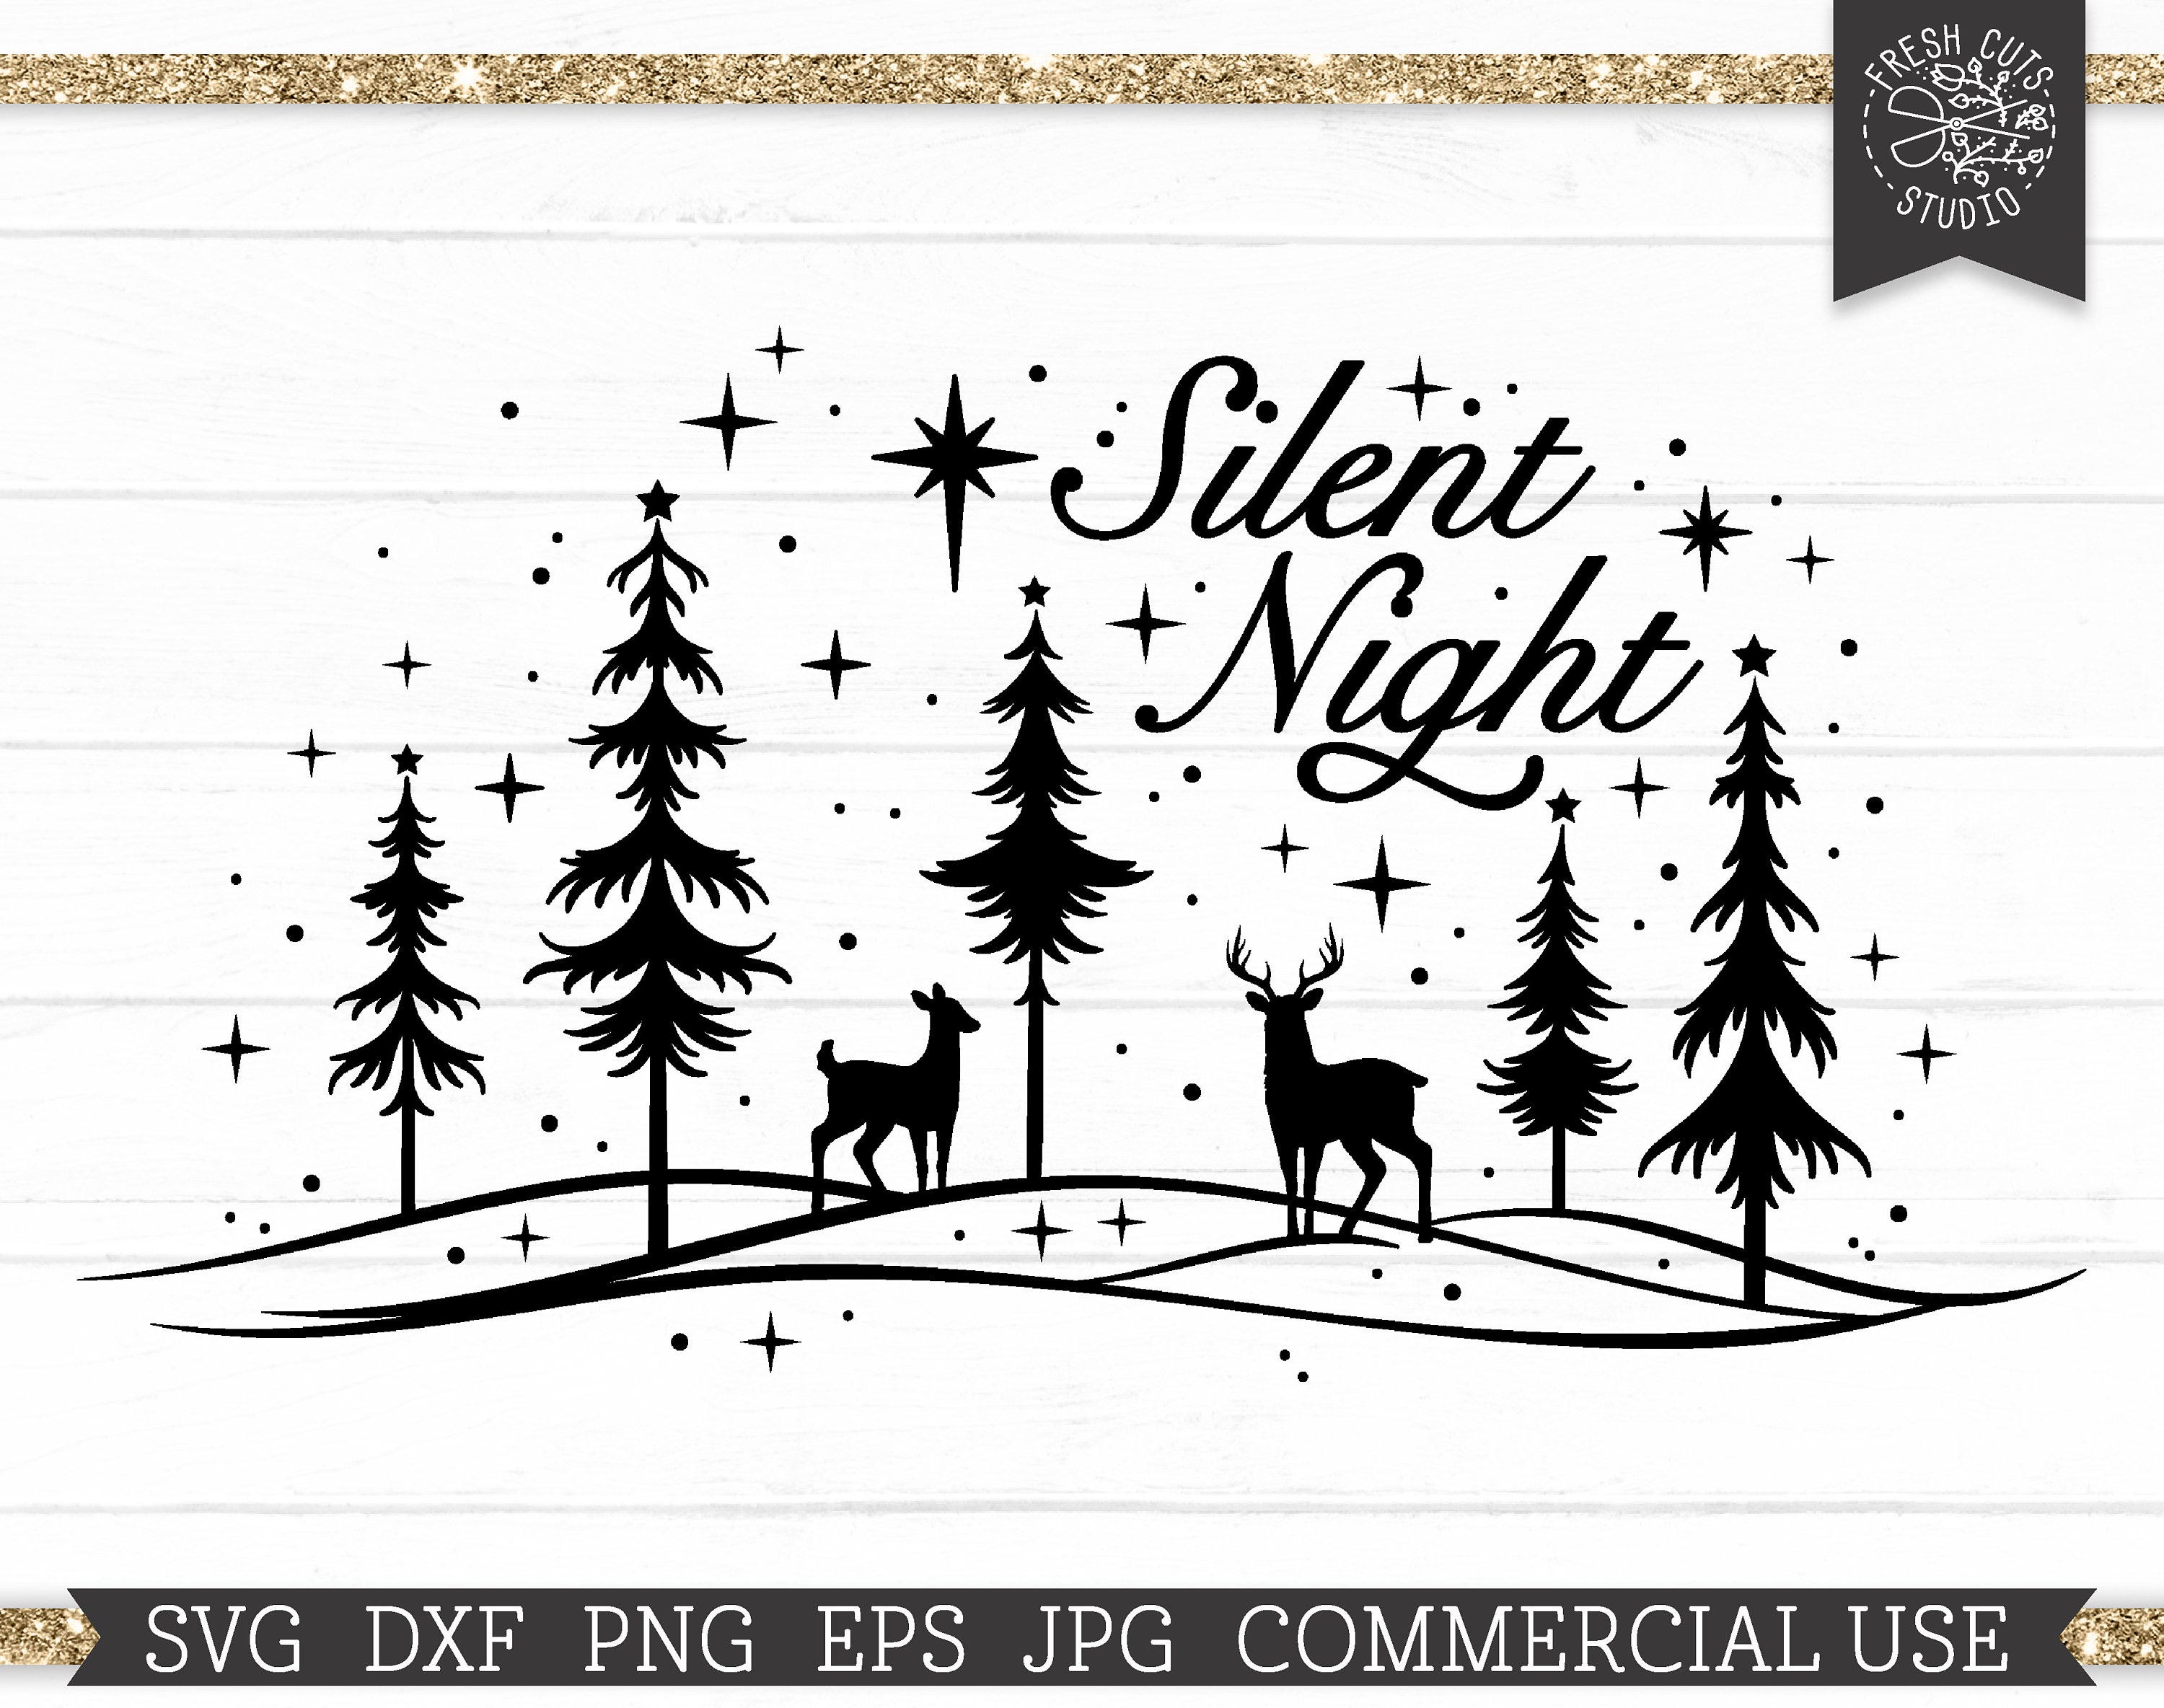 Silent Night SVG Snowing Winter Woods Cut File Design, Christmas Deer Scene, Doe and Buck, Deer Family, Snowy Forest Starry Night, dxf png